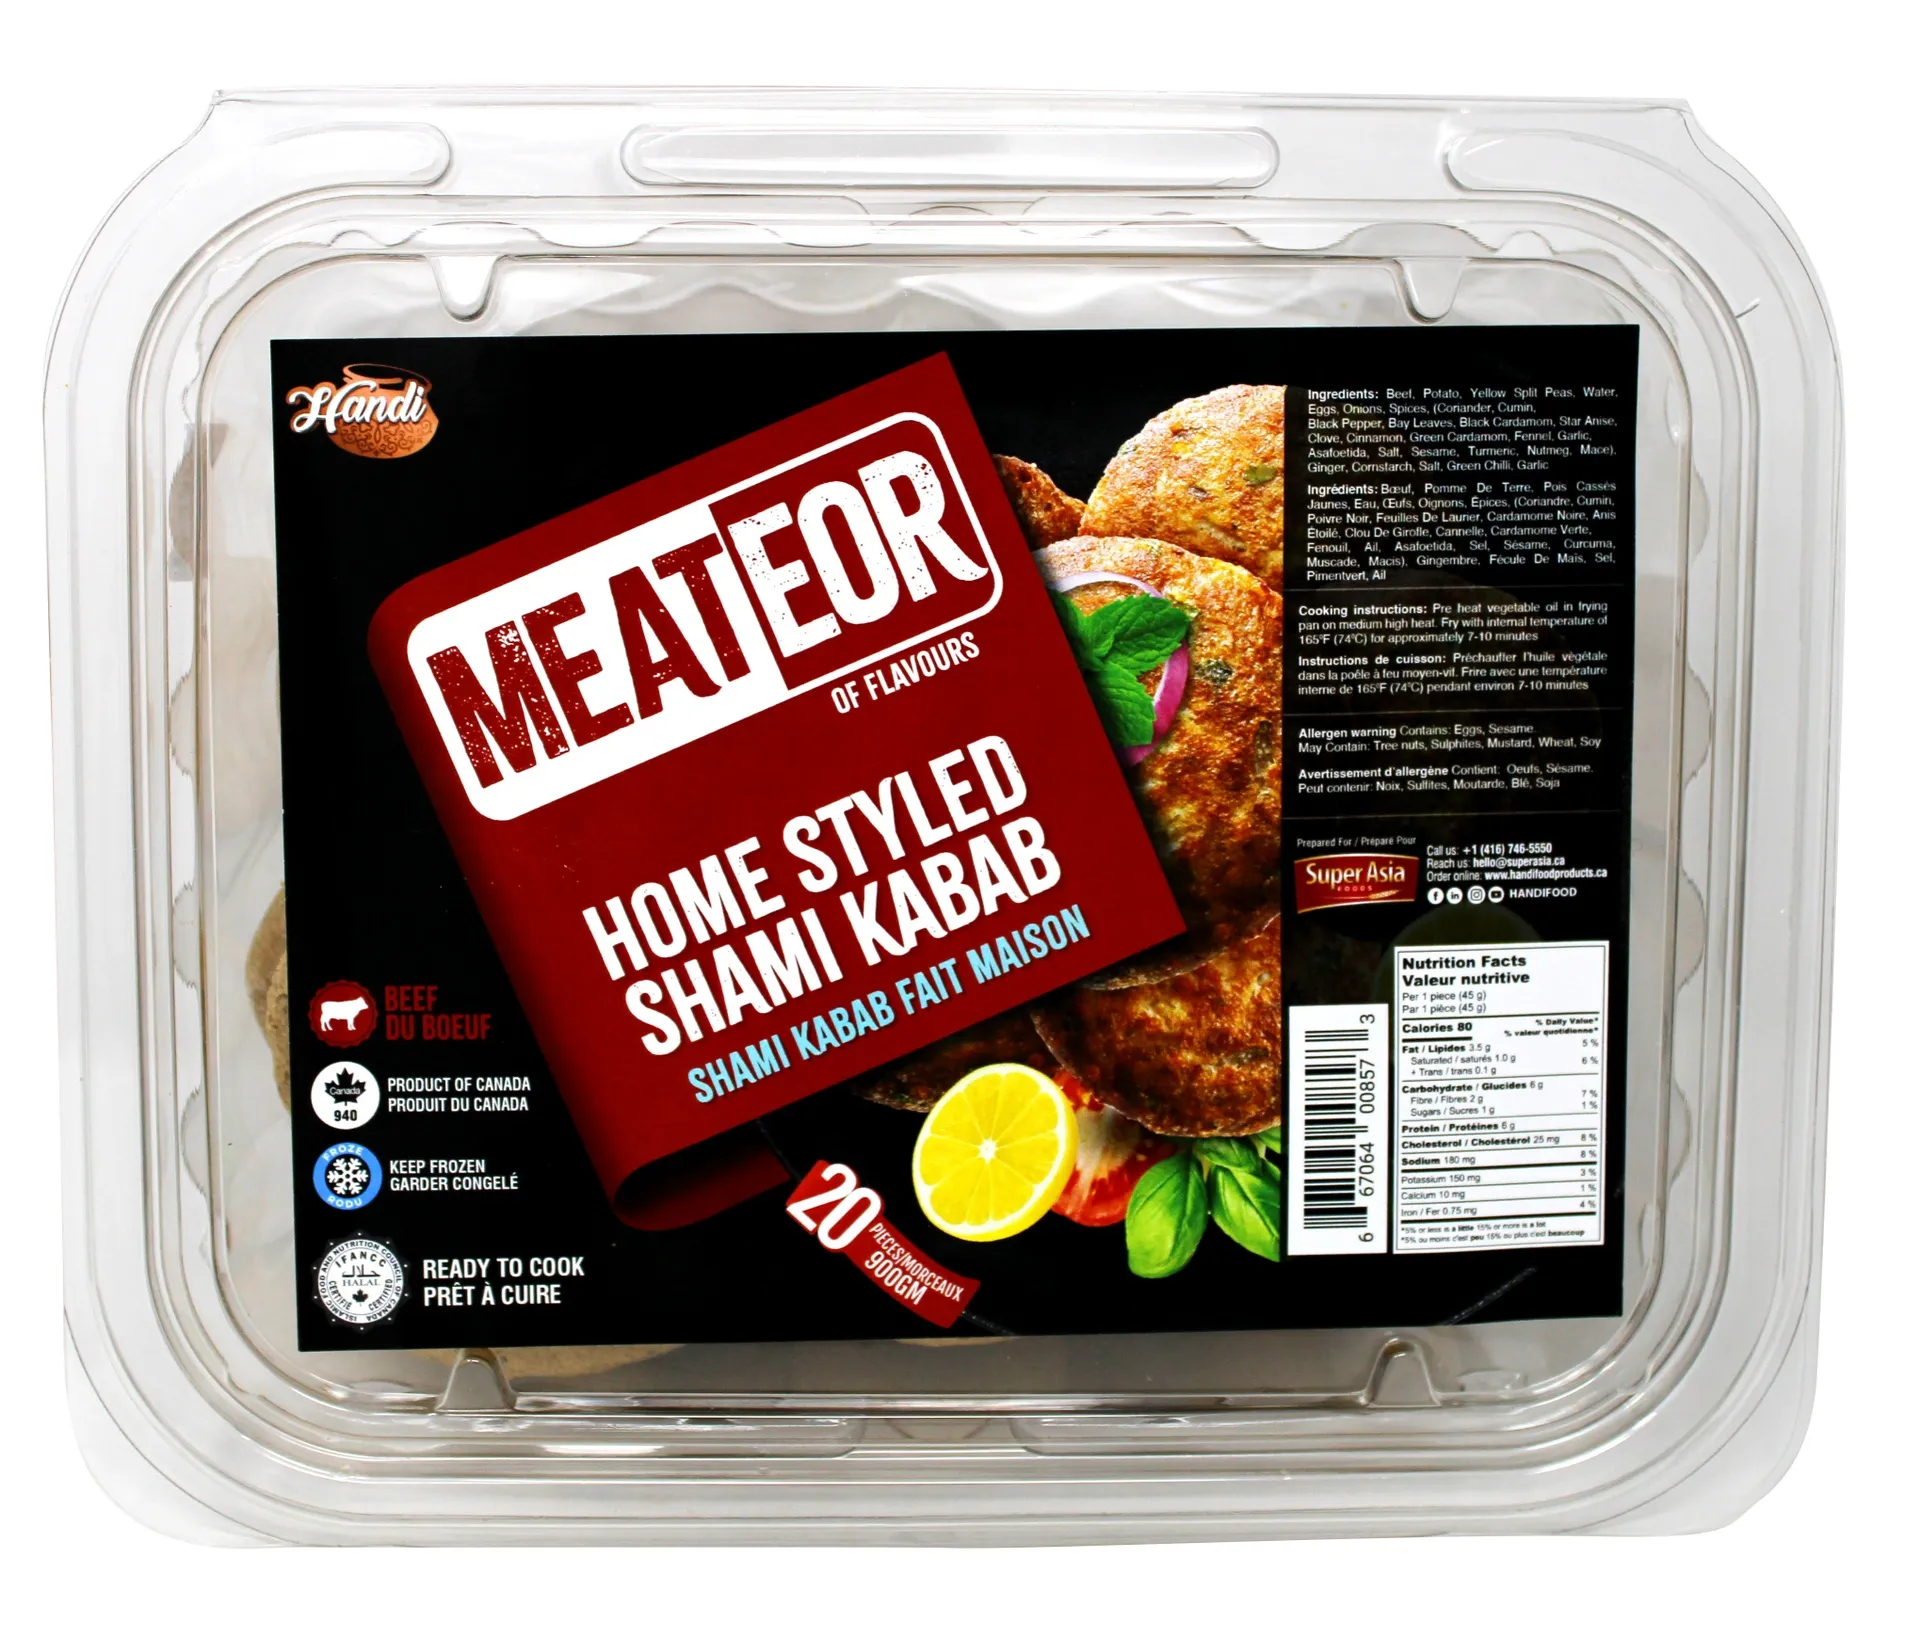 MEATEOR CHICKEN HOME STYLED SHAMI KEBAB 900 GM